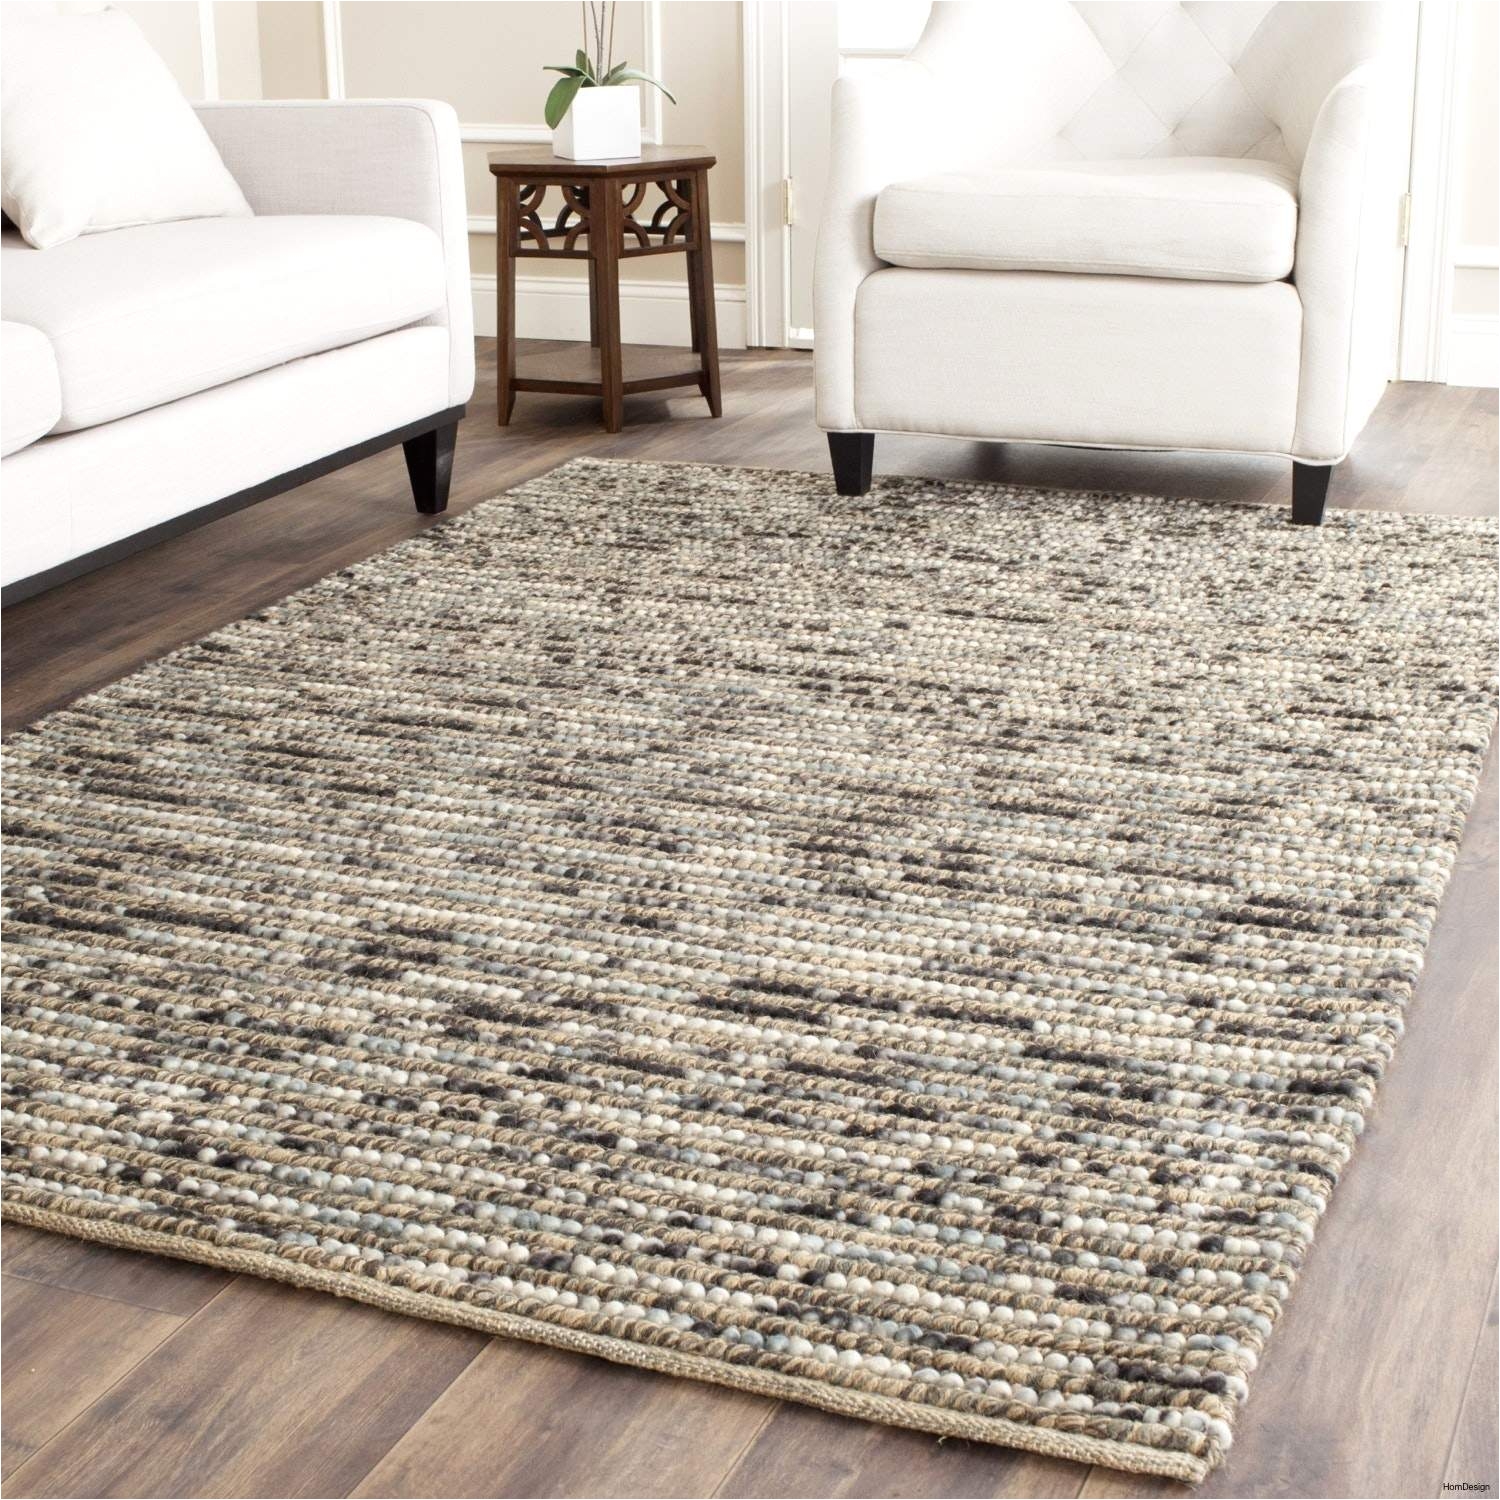 dark blue area rug unique rugged new cheap area rugs blue rug as gold and white